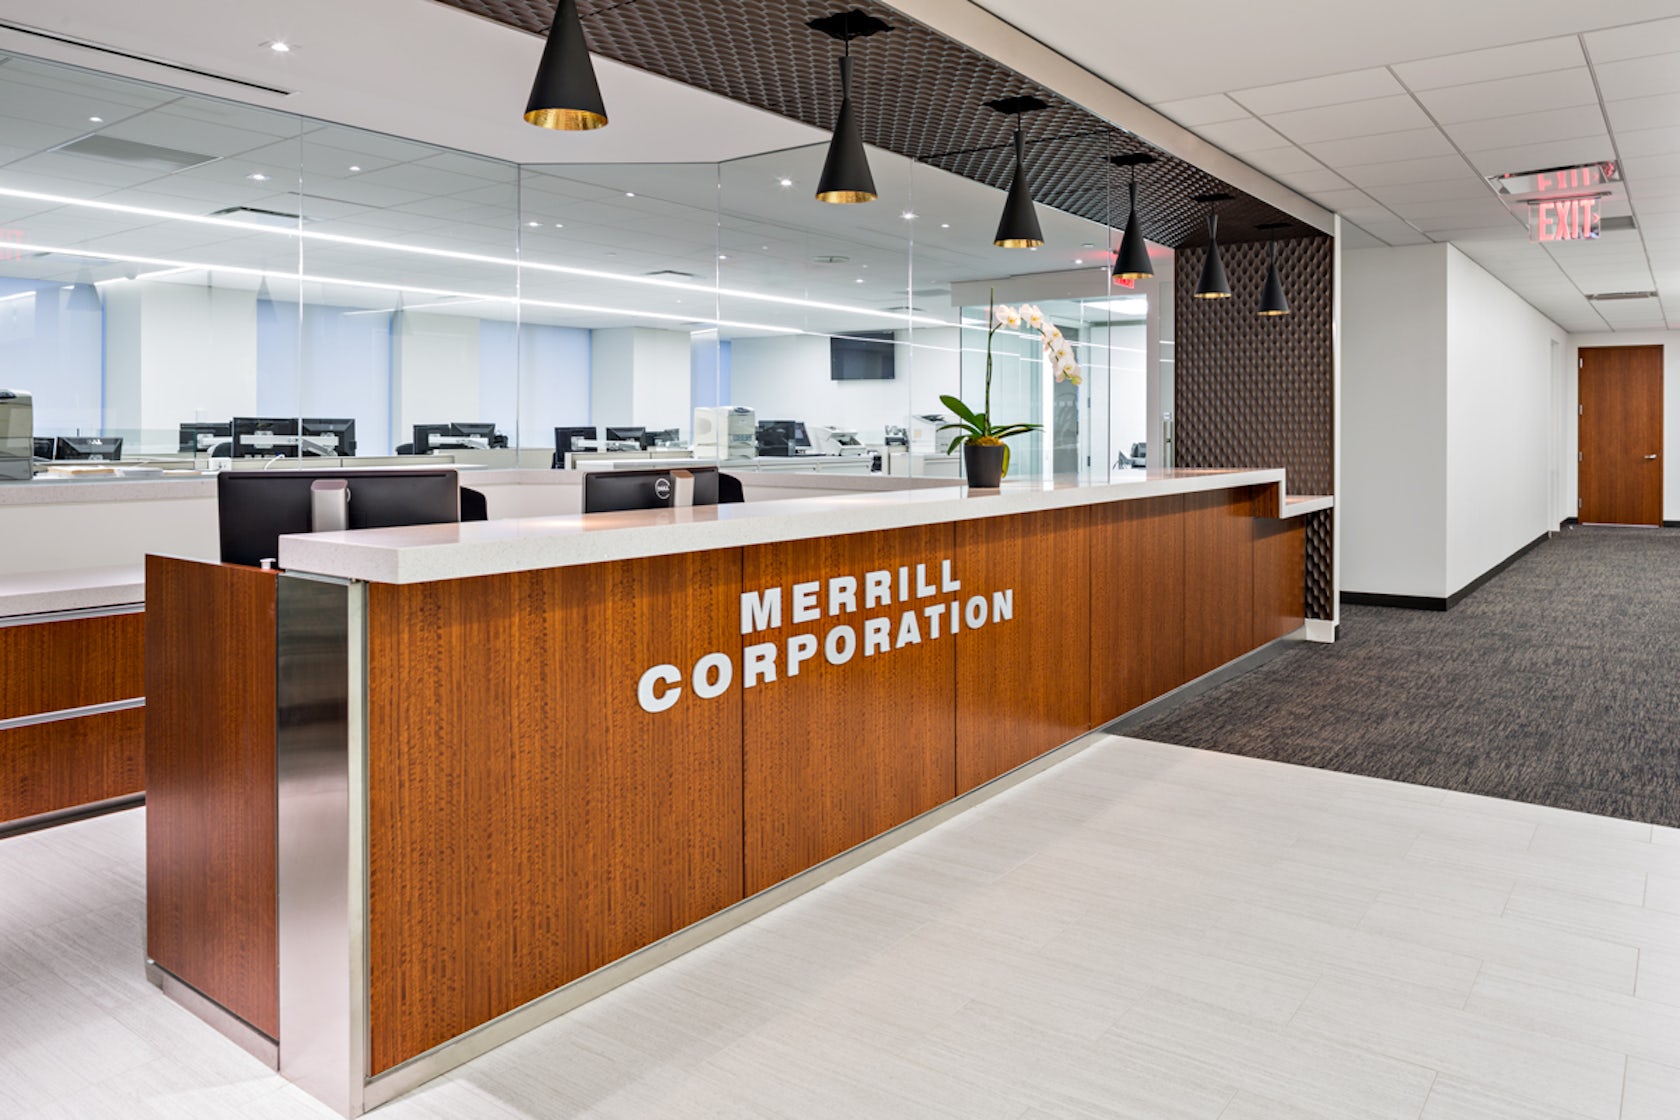 Merrill Corporation by Architizer